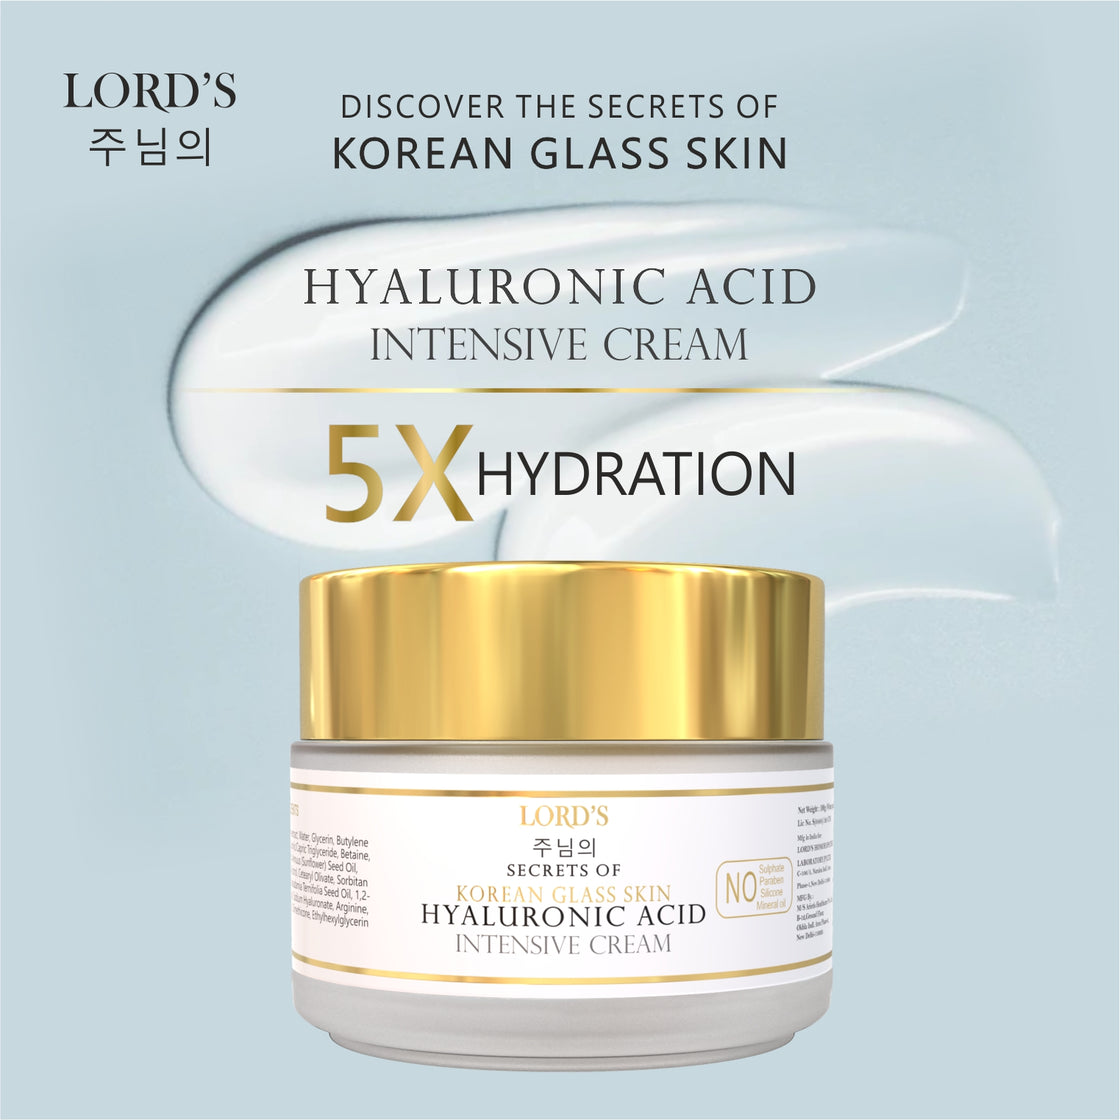 Lord's Hyaluronic Acid Intensive Cream